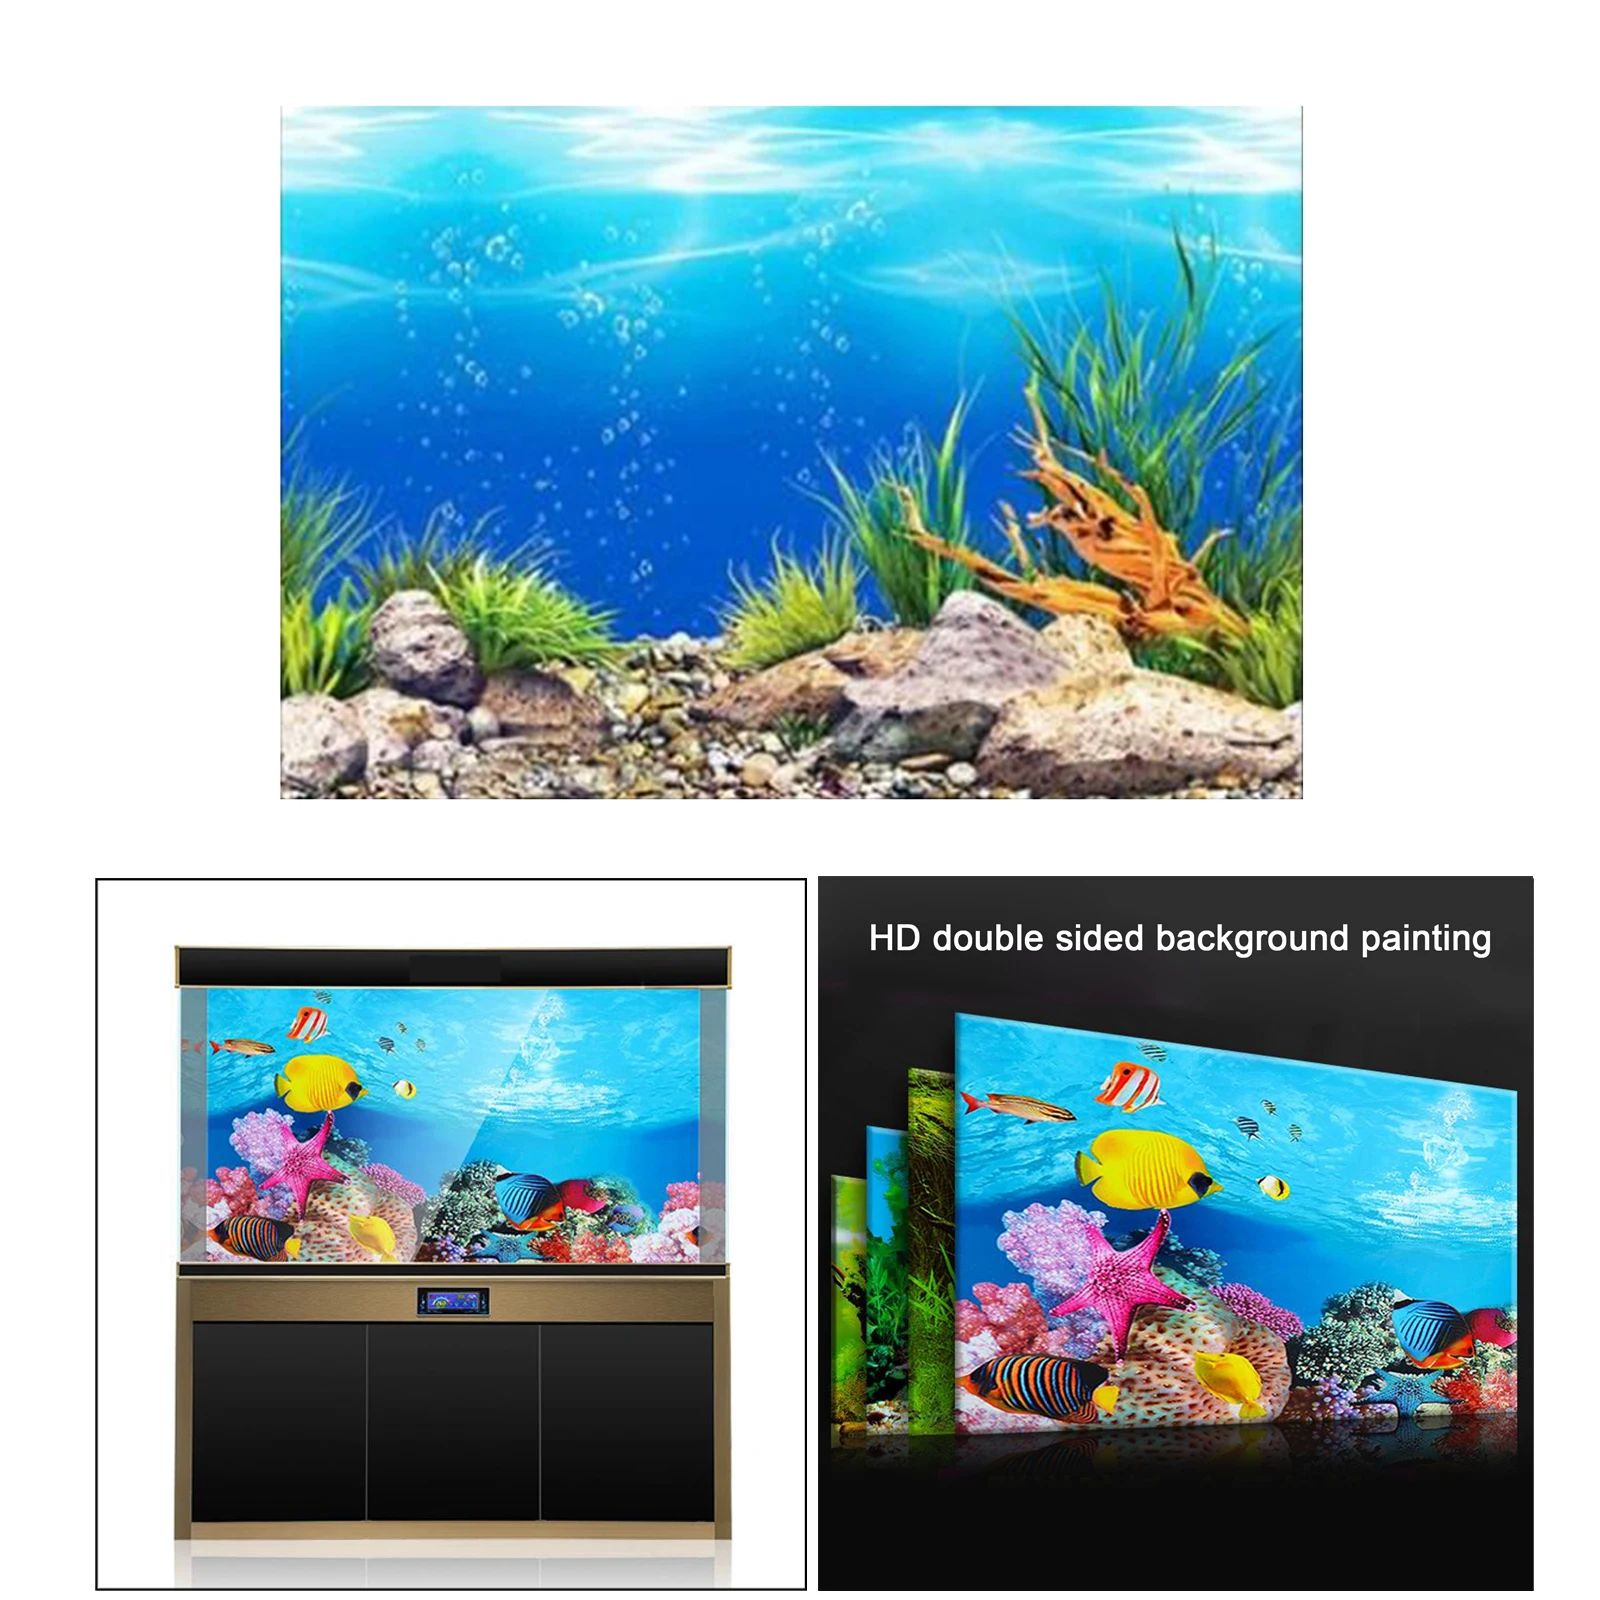 HEEPDD Aquarium Poster Underwater Marine Coral Fish Tank Background Poster Thicken PVC Adhesive Static Cling Backdrop Decorative Paper 